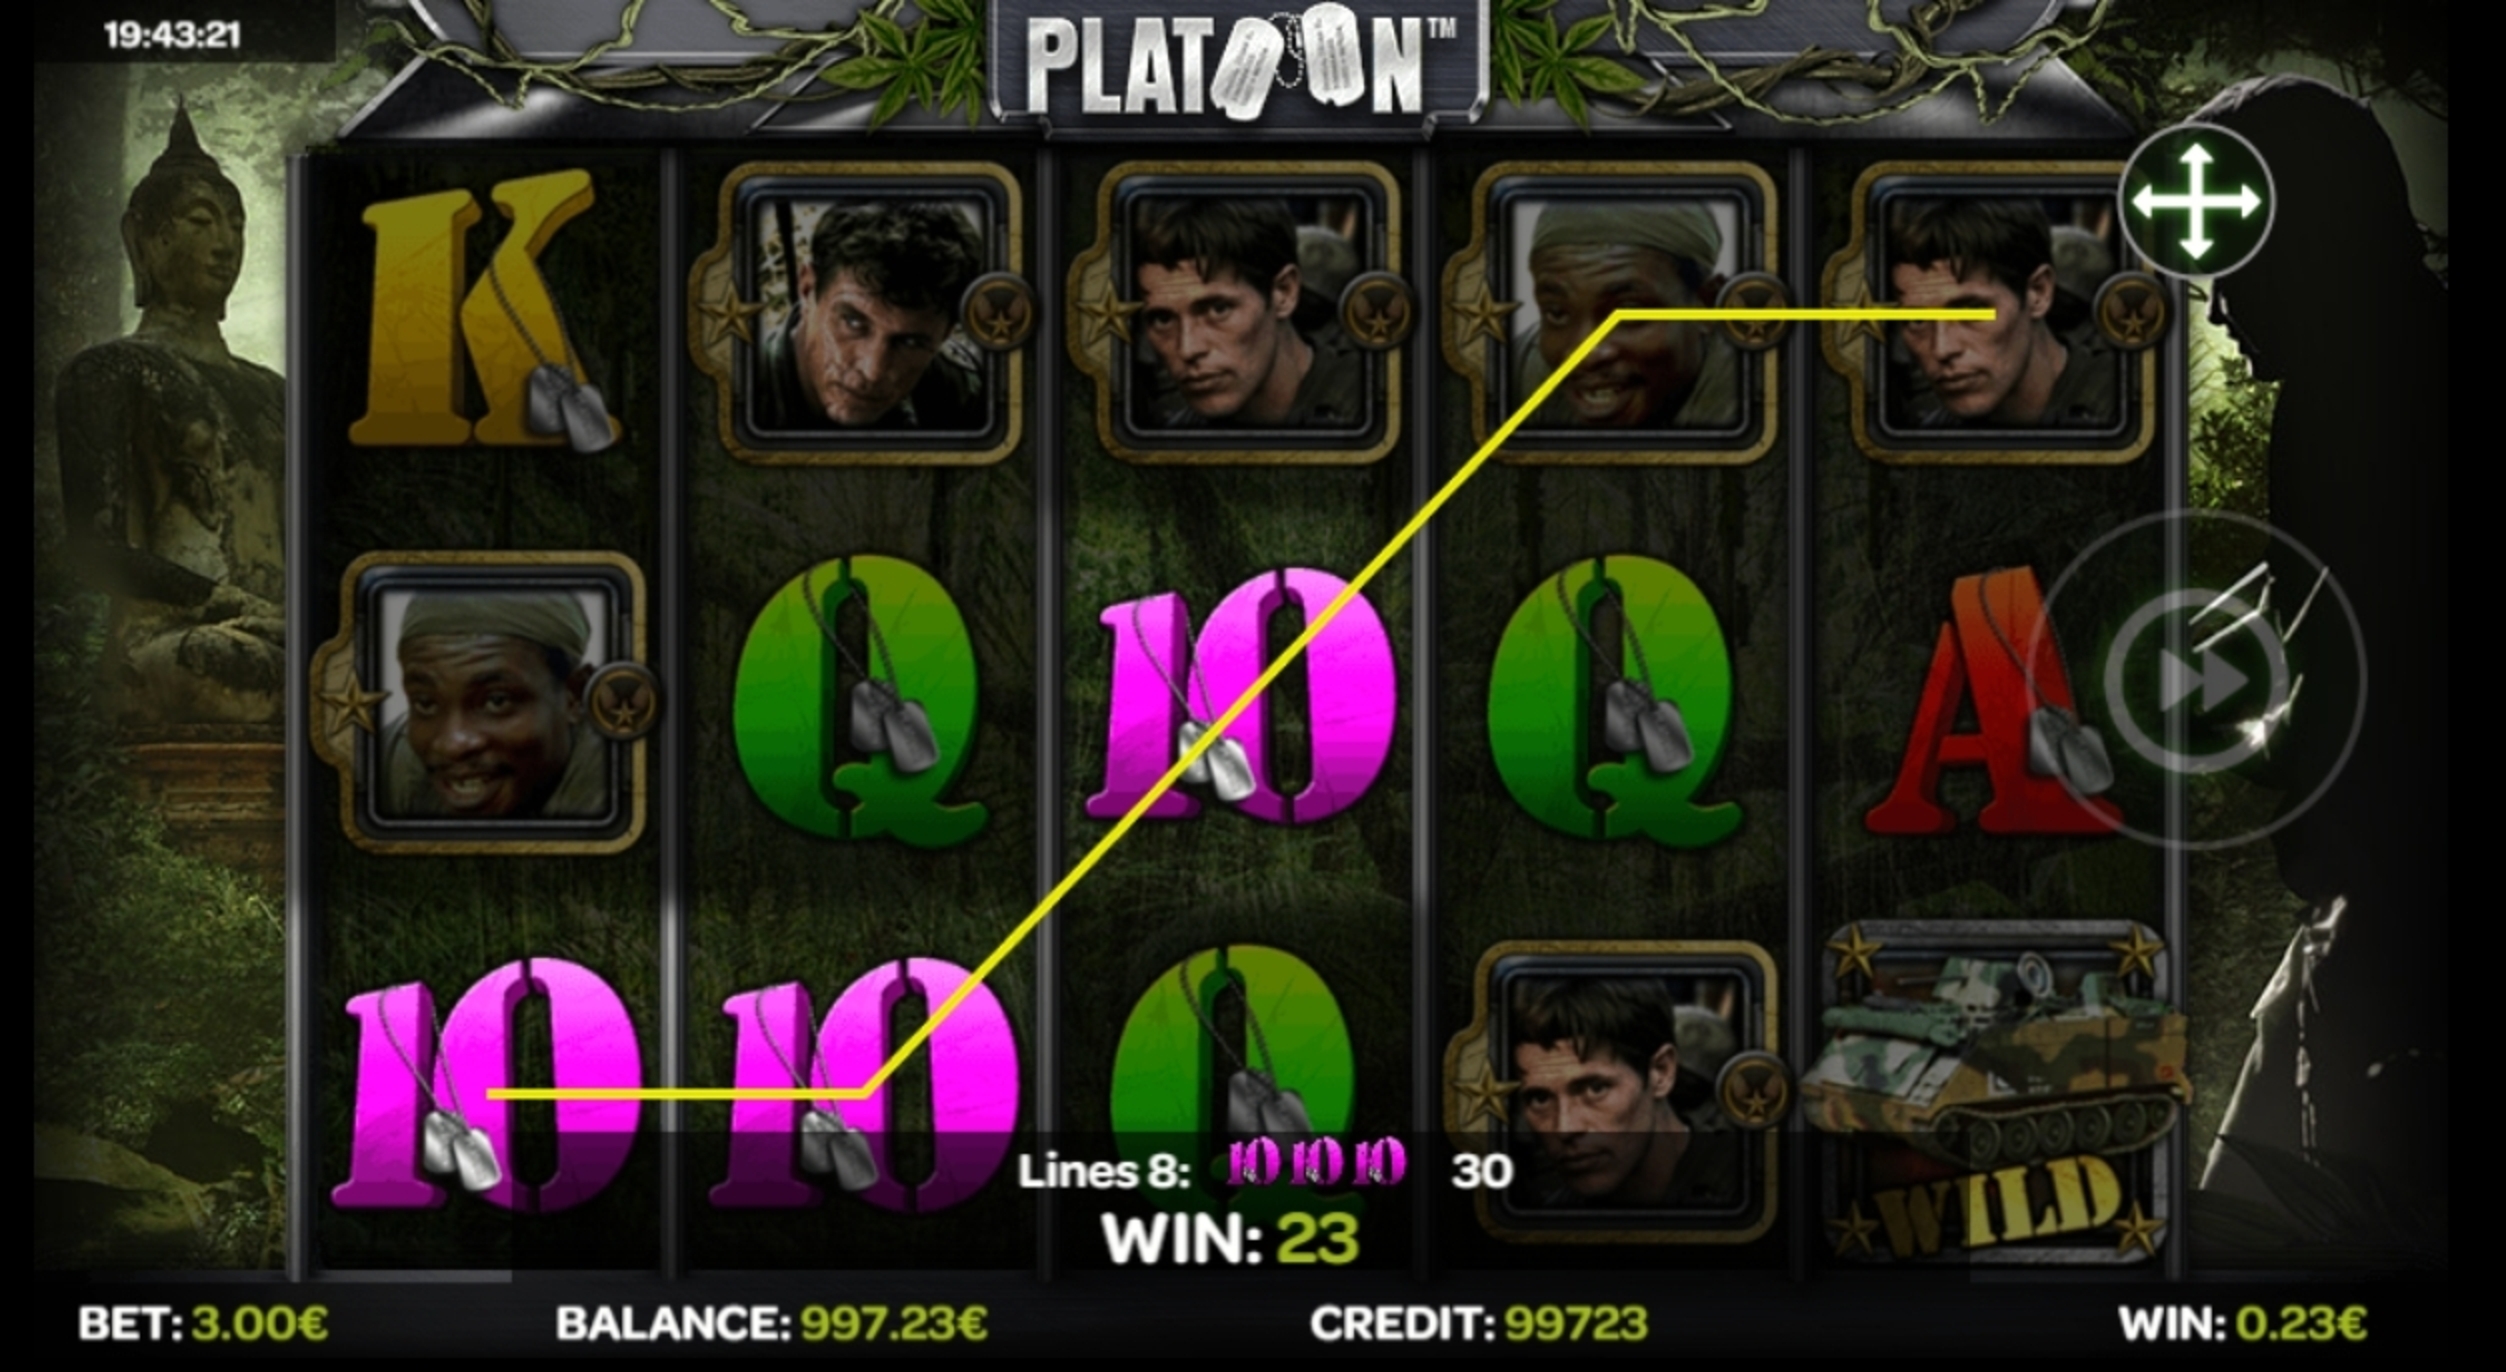 Win Money in Platoon Free Slot Game by iSoftBet